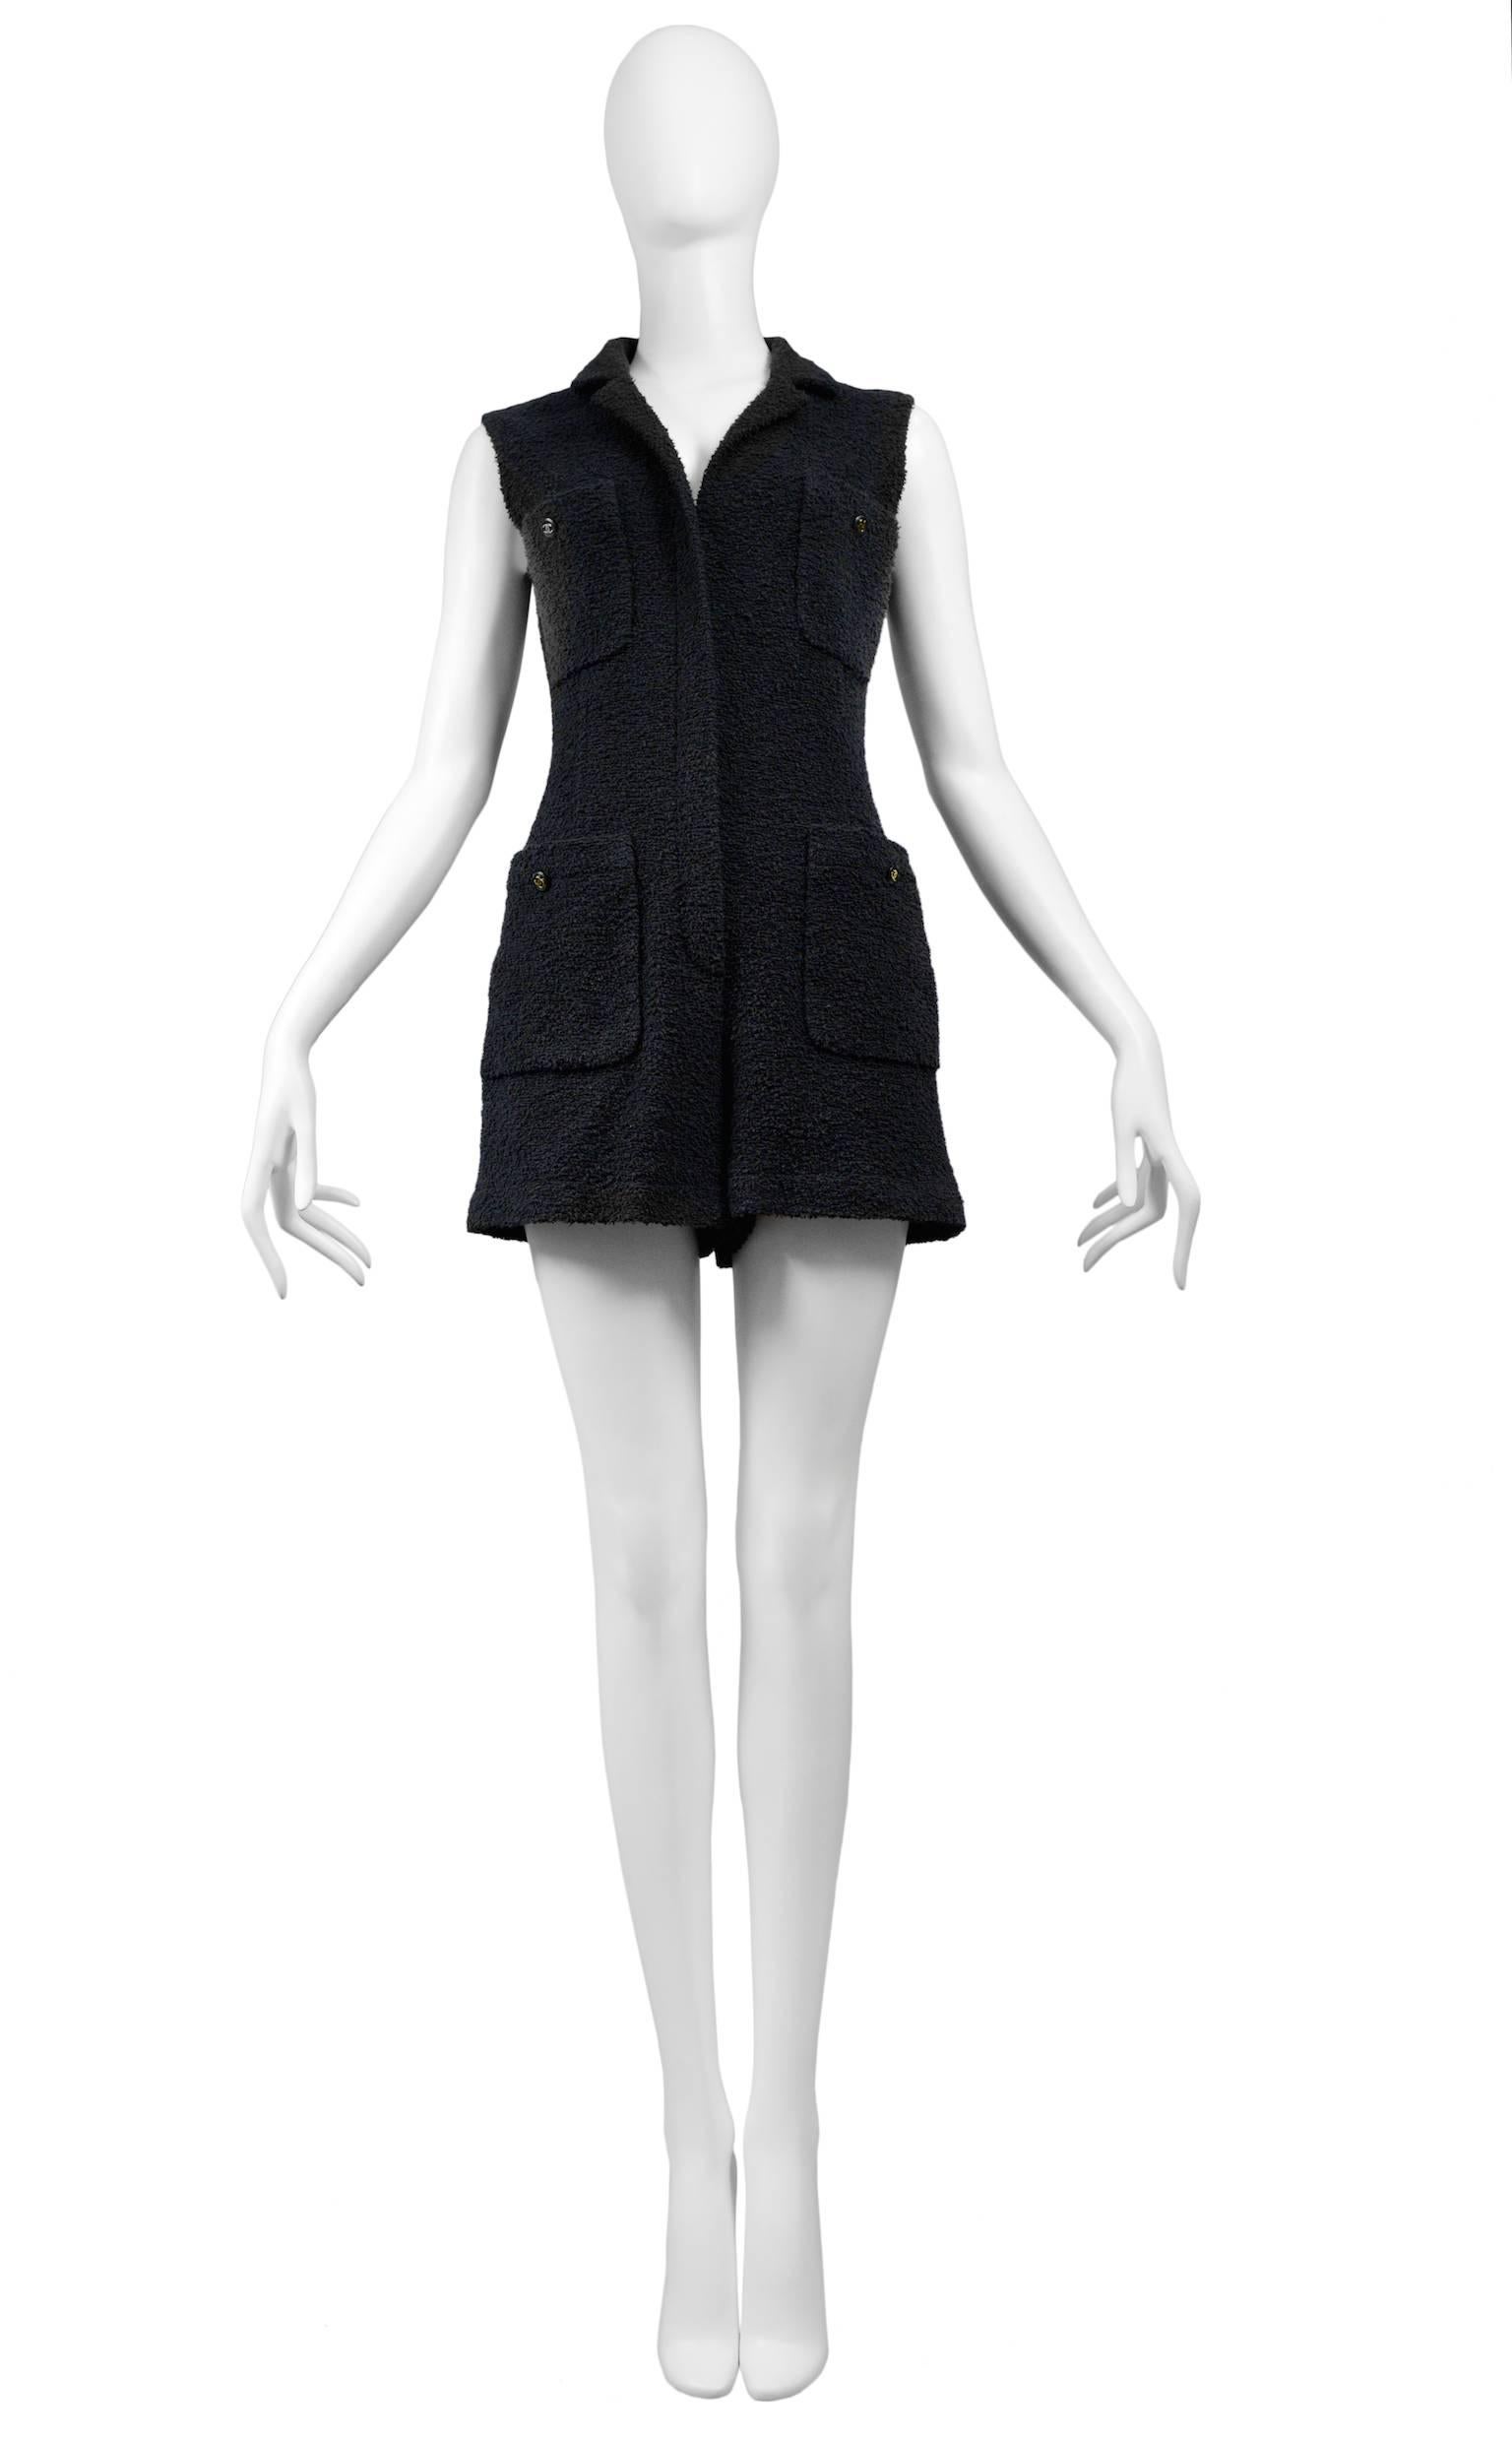 Iconic Chanel black terry cloth romper with shorts. Gold black w gold CC buttons. 1990's.

Please inquire for additional images. 